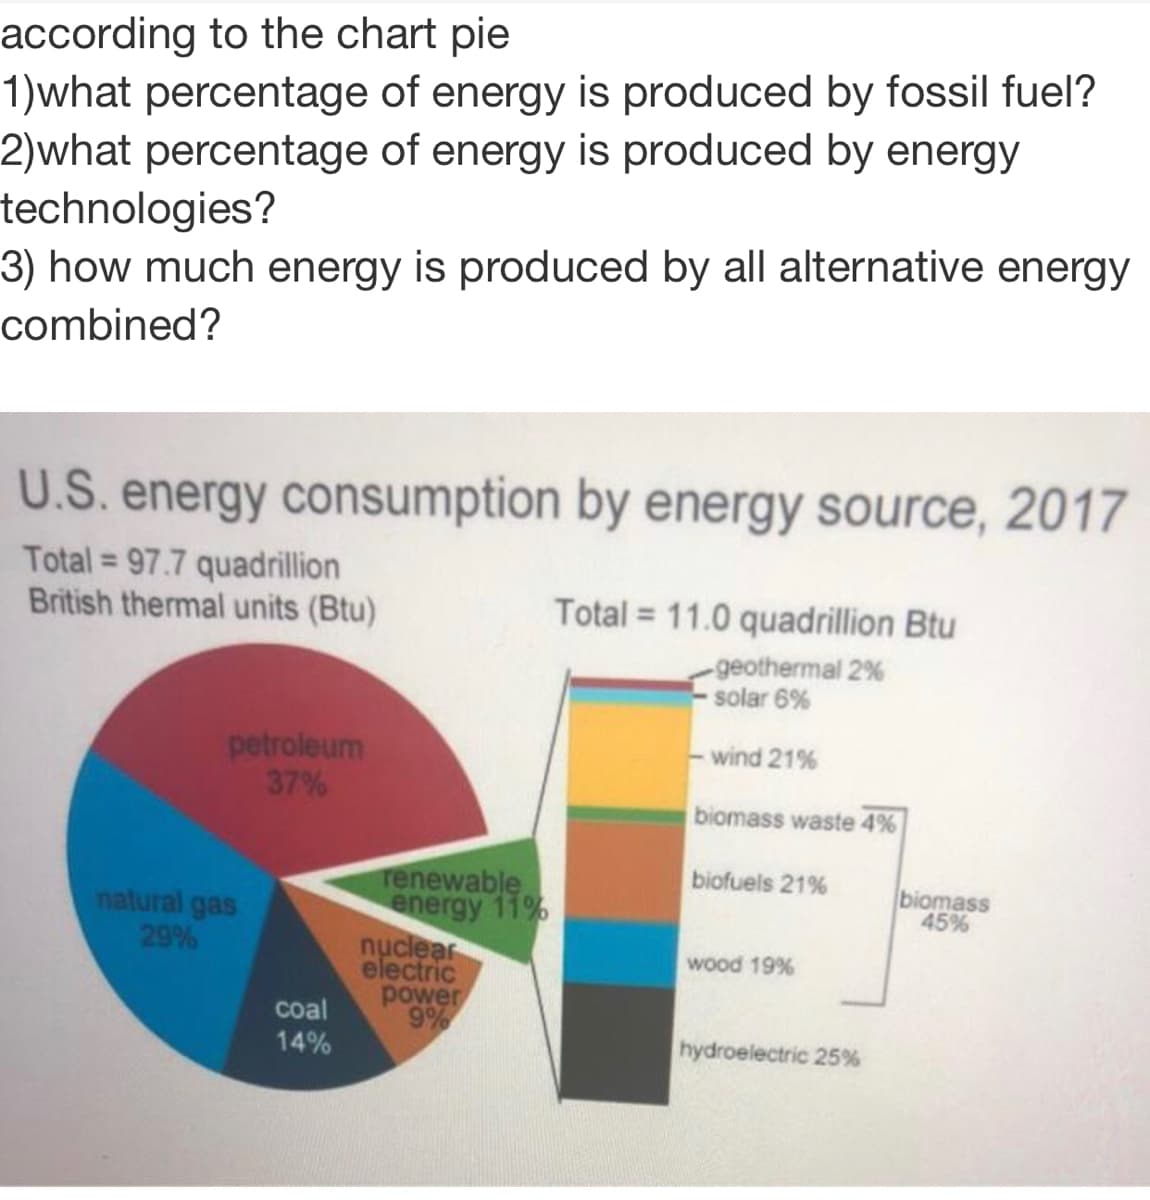 according to the chart pie
1)what percentage of energy is produced by fossil fuel?
2)what percentage of energy is produced by energy
technologies?
3) how much energy is produced by all alternative energy
combined?
U.S. energy consumption by energy source, 2017
Total 97.7 quadrillion
British thermal units (Btu)
Total = 11.0 quadrillion Btu
geothermal 2 %
solar 6%
petroleum
37%
- wind 21%
biomass waste 4%
biofuels 21%
renewable
energy 11%
nuclear
electric
power
9%
biomass
45%
natural gas
29%
wood 19%
coal
14%
hydroelectric 25%
